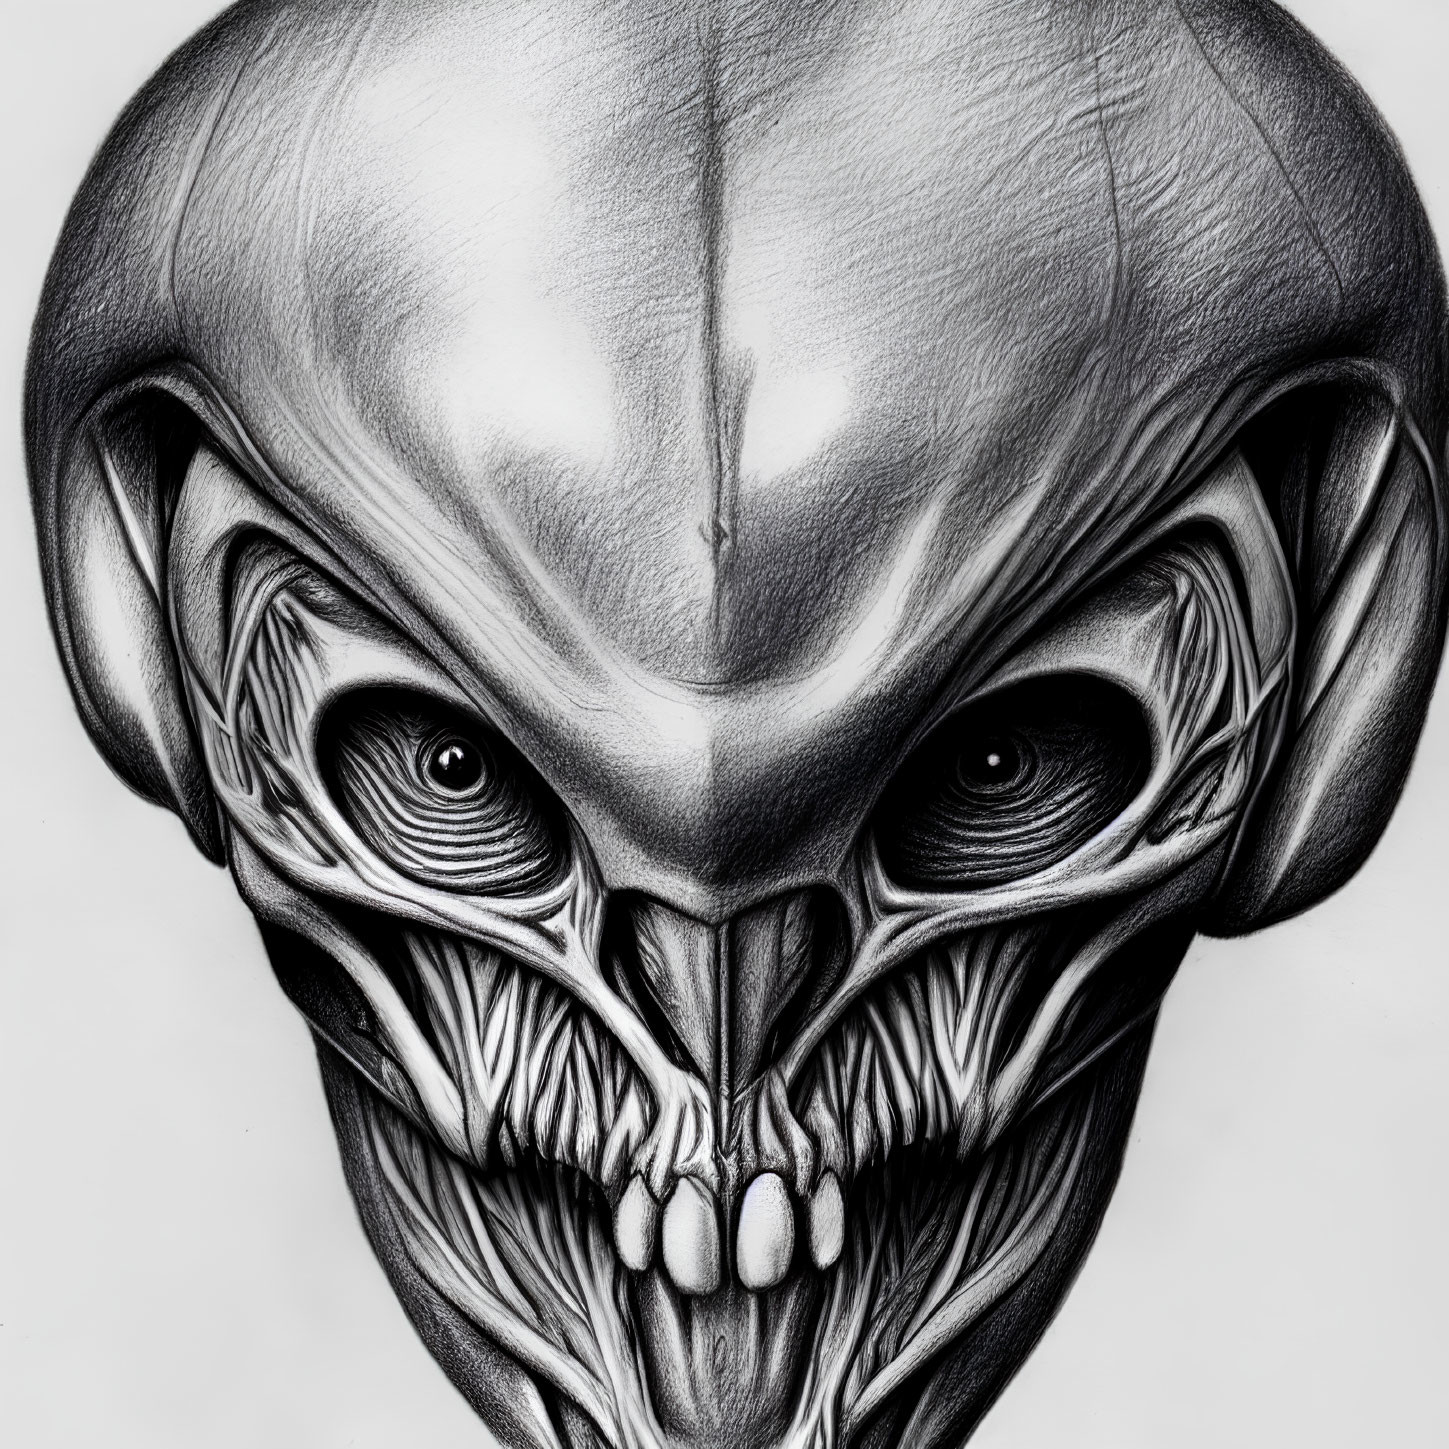 Detailed pencil drawing of alien-like skull with dark eye sockets and intricate textures, featuring a sinister look